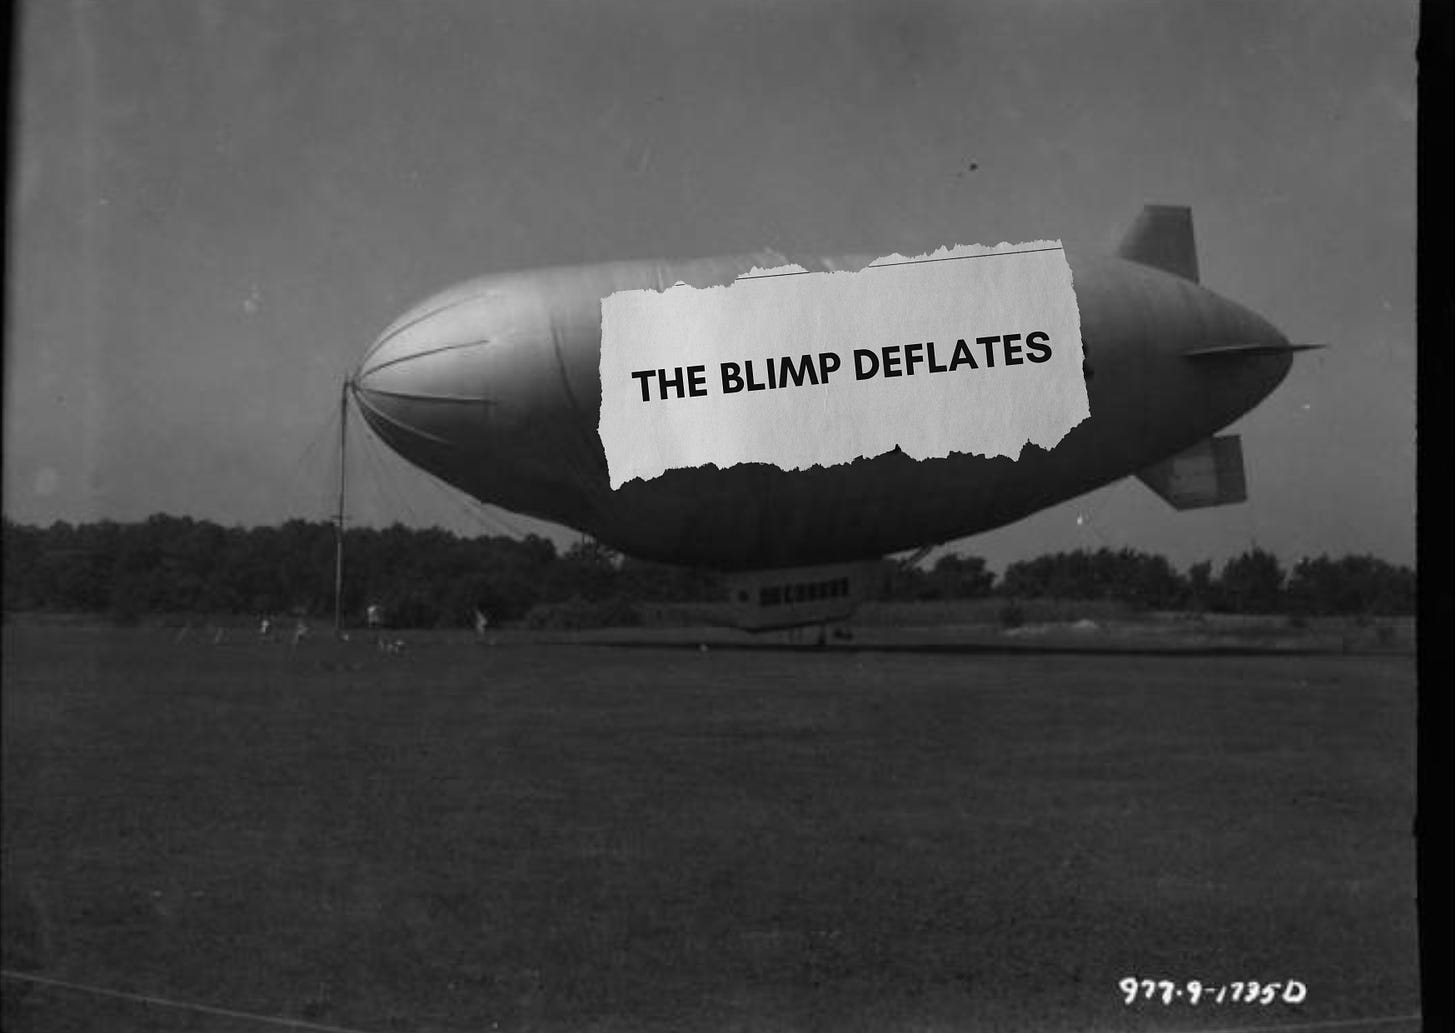 A blimp deflating with a ripped piece of newspaper over it with the words "THE BLIMP DEFLATES" typed on it.